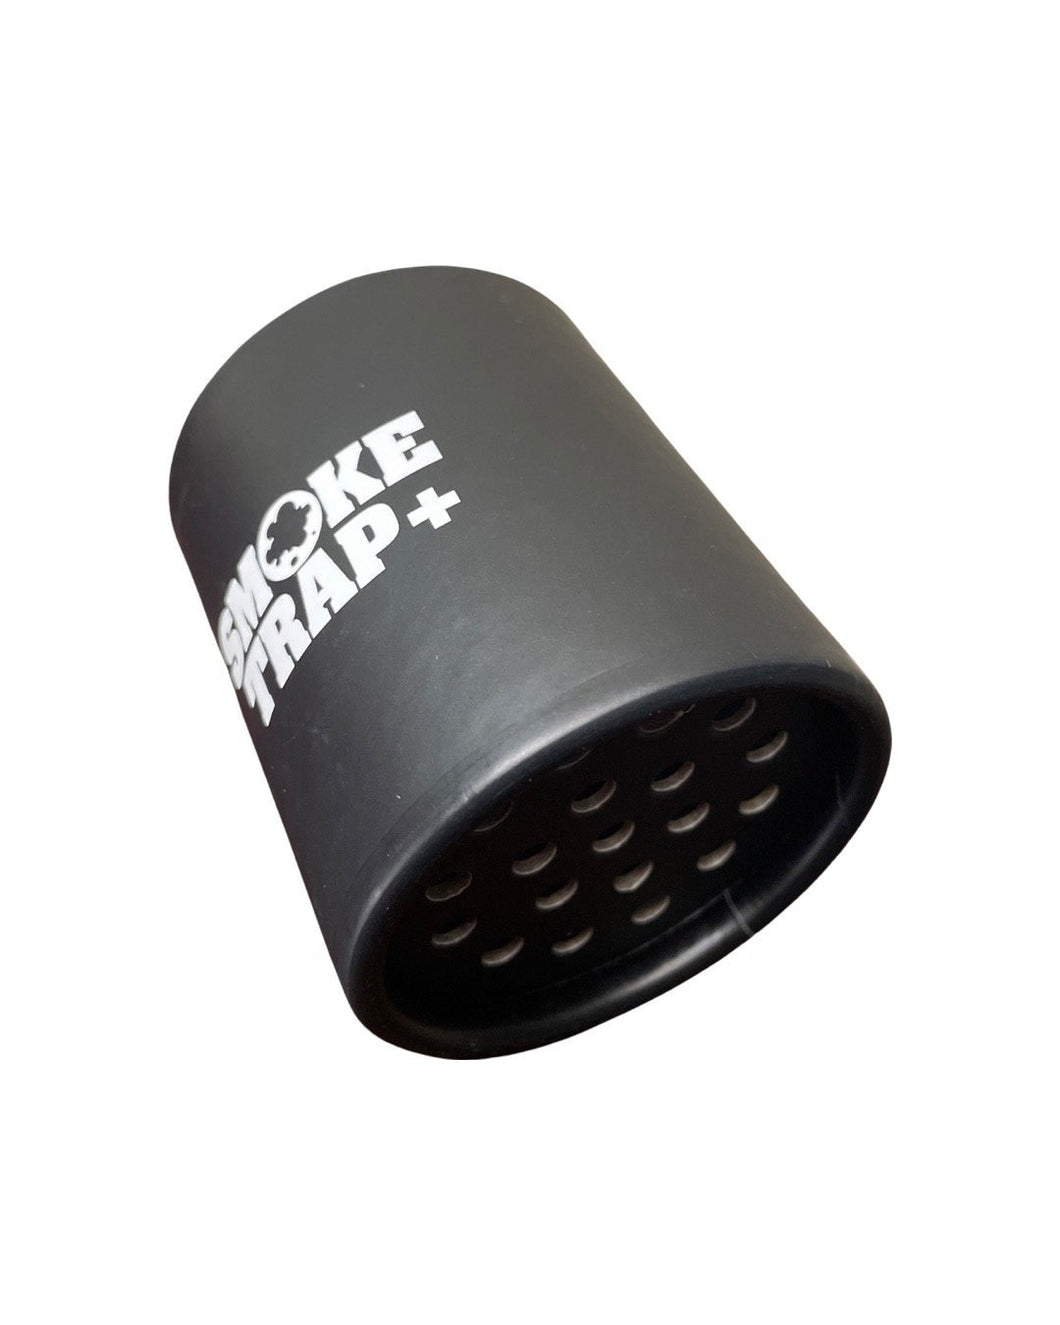 Smoke Trap Personal Air Filter sploof/buddy Smoke Filter With ECO  Replaceable Filters Long Lasting Easy Exhale black 